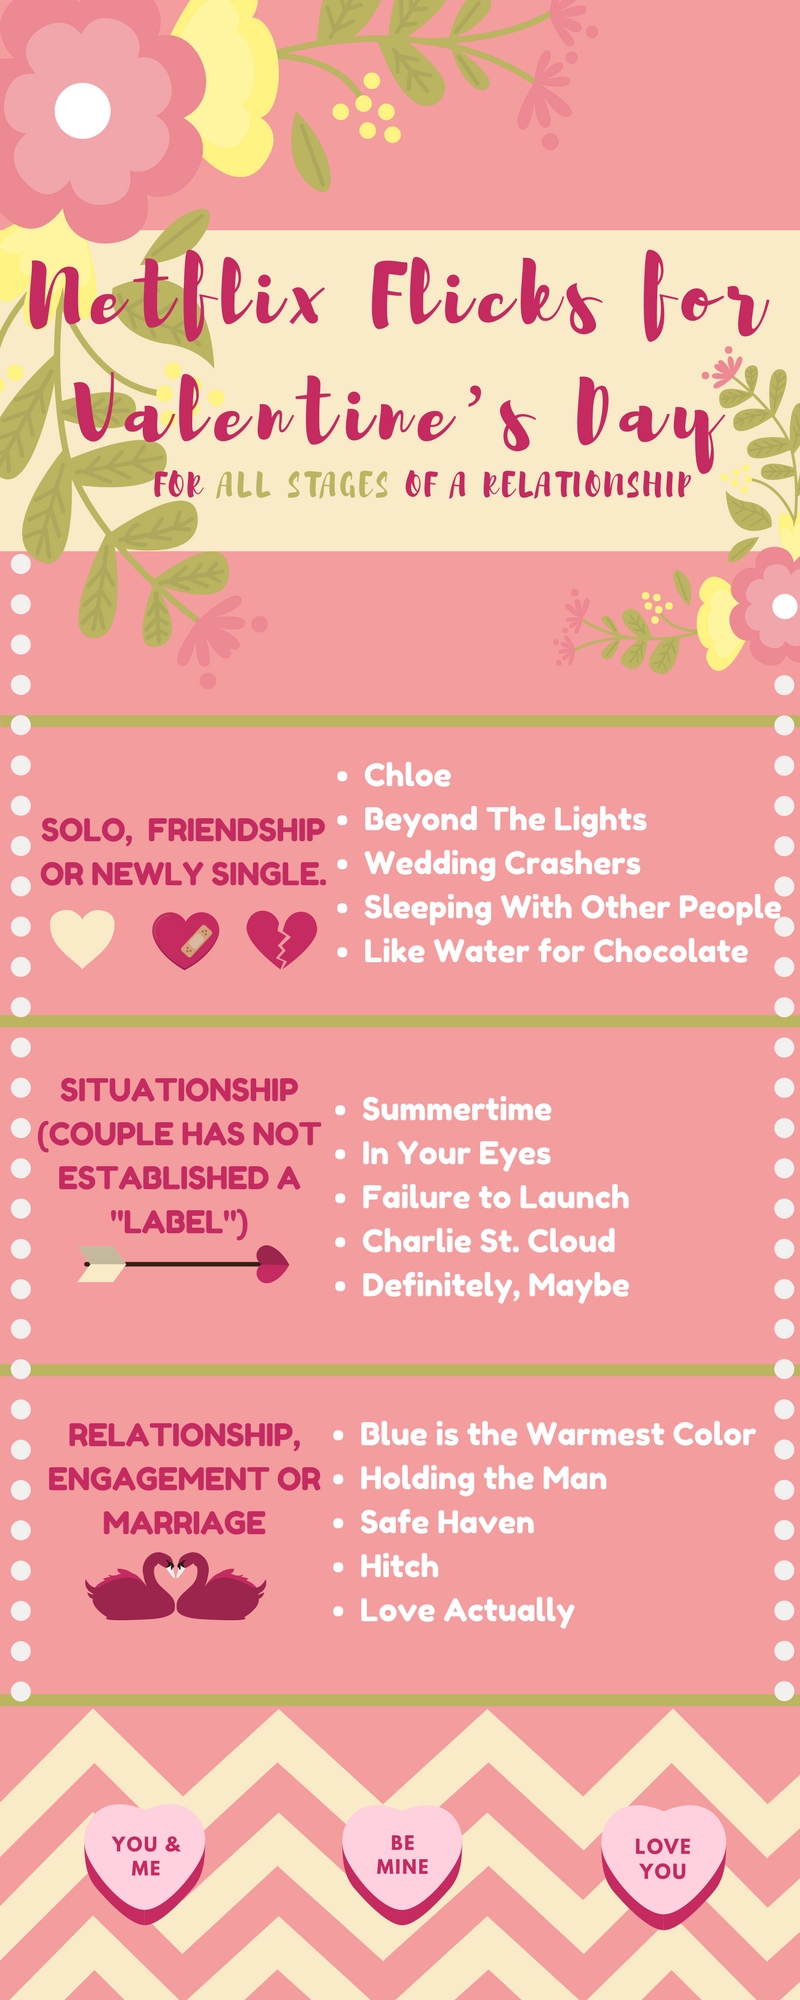 An infographic depicting a list of diverse and inclusive Netflix movies for all stages of a relationship.